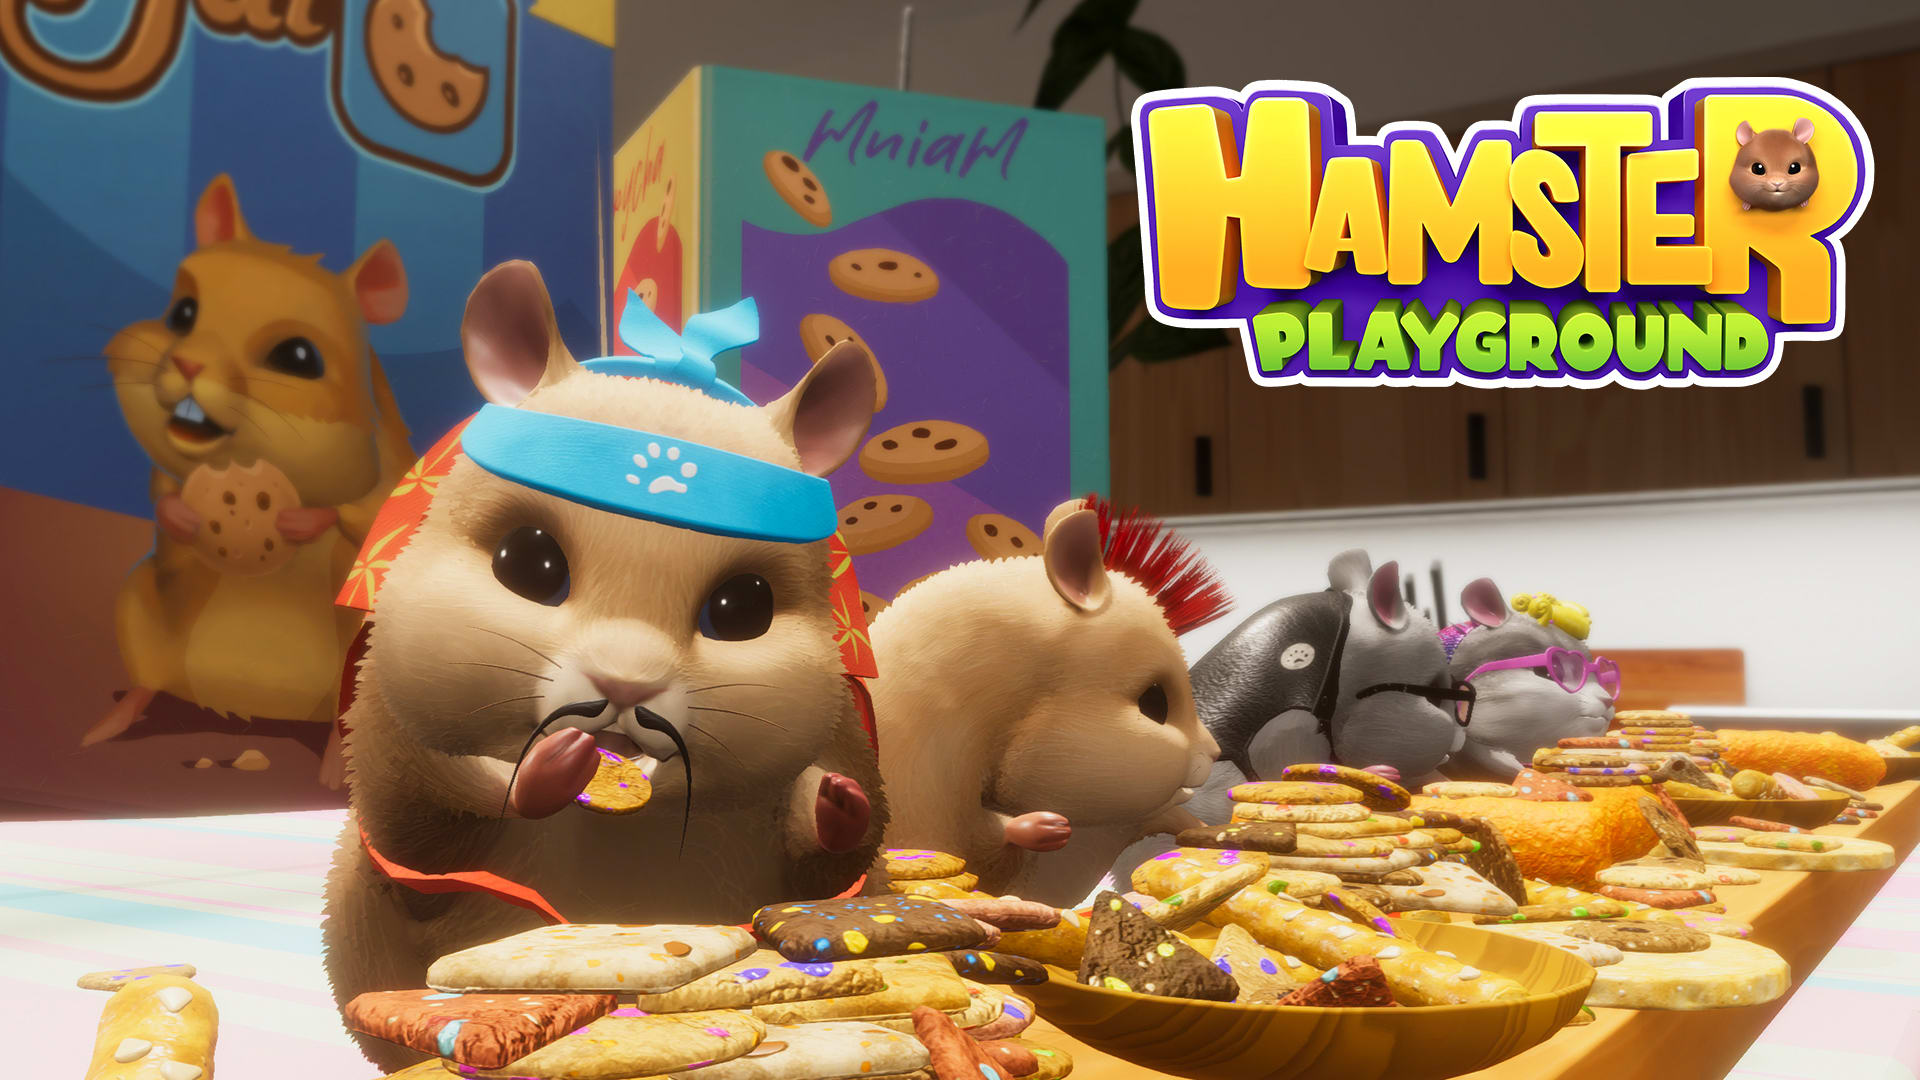 Hamster Playground - Eating Contest Game Mode